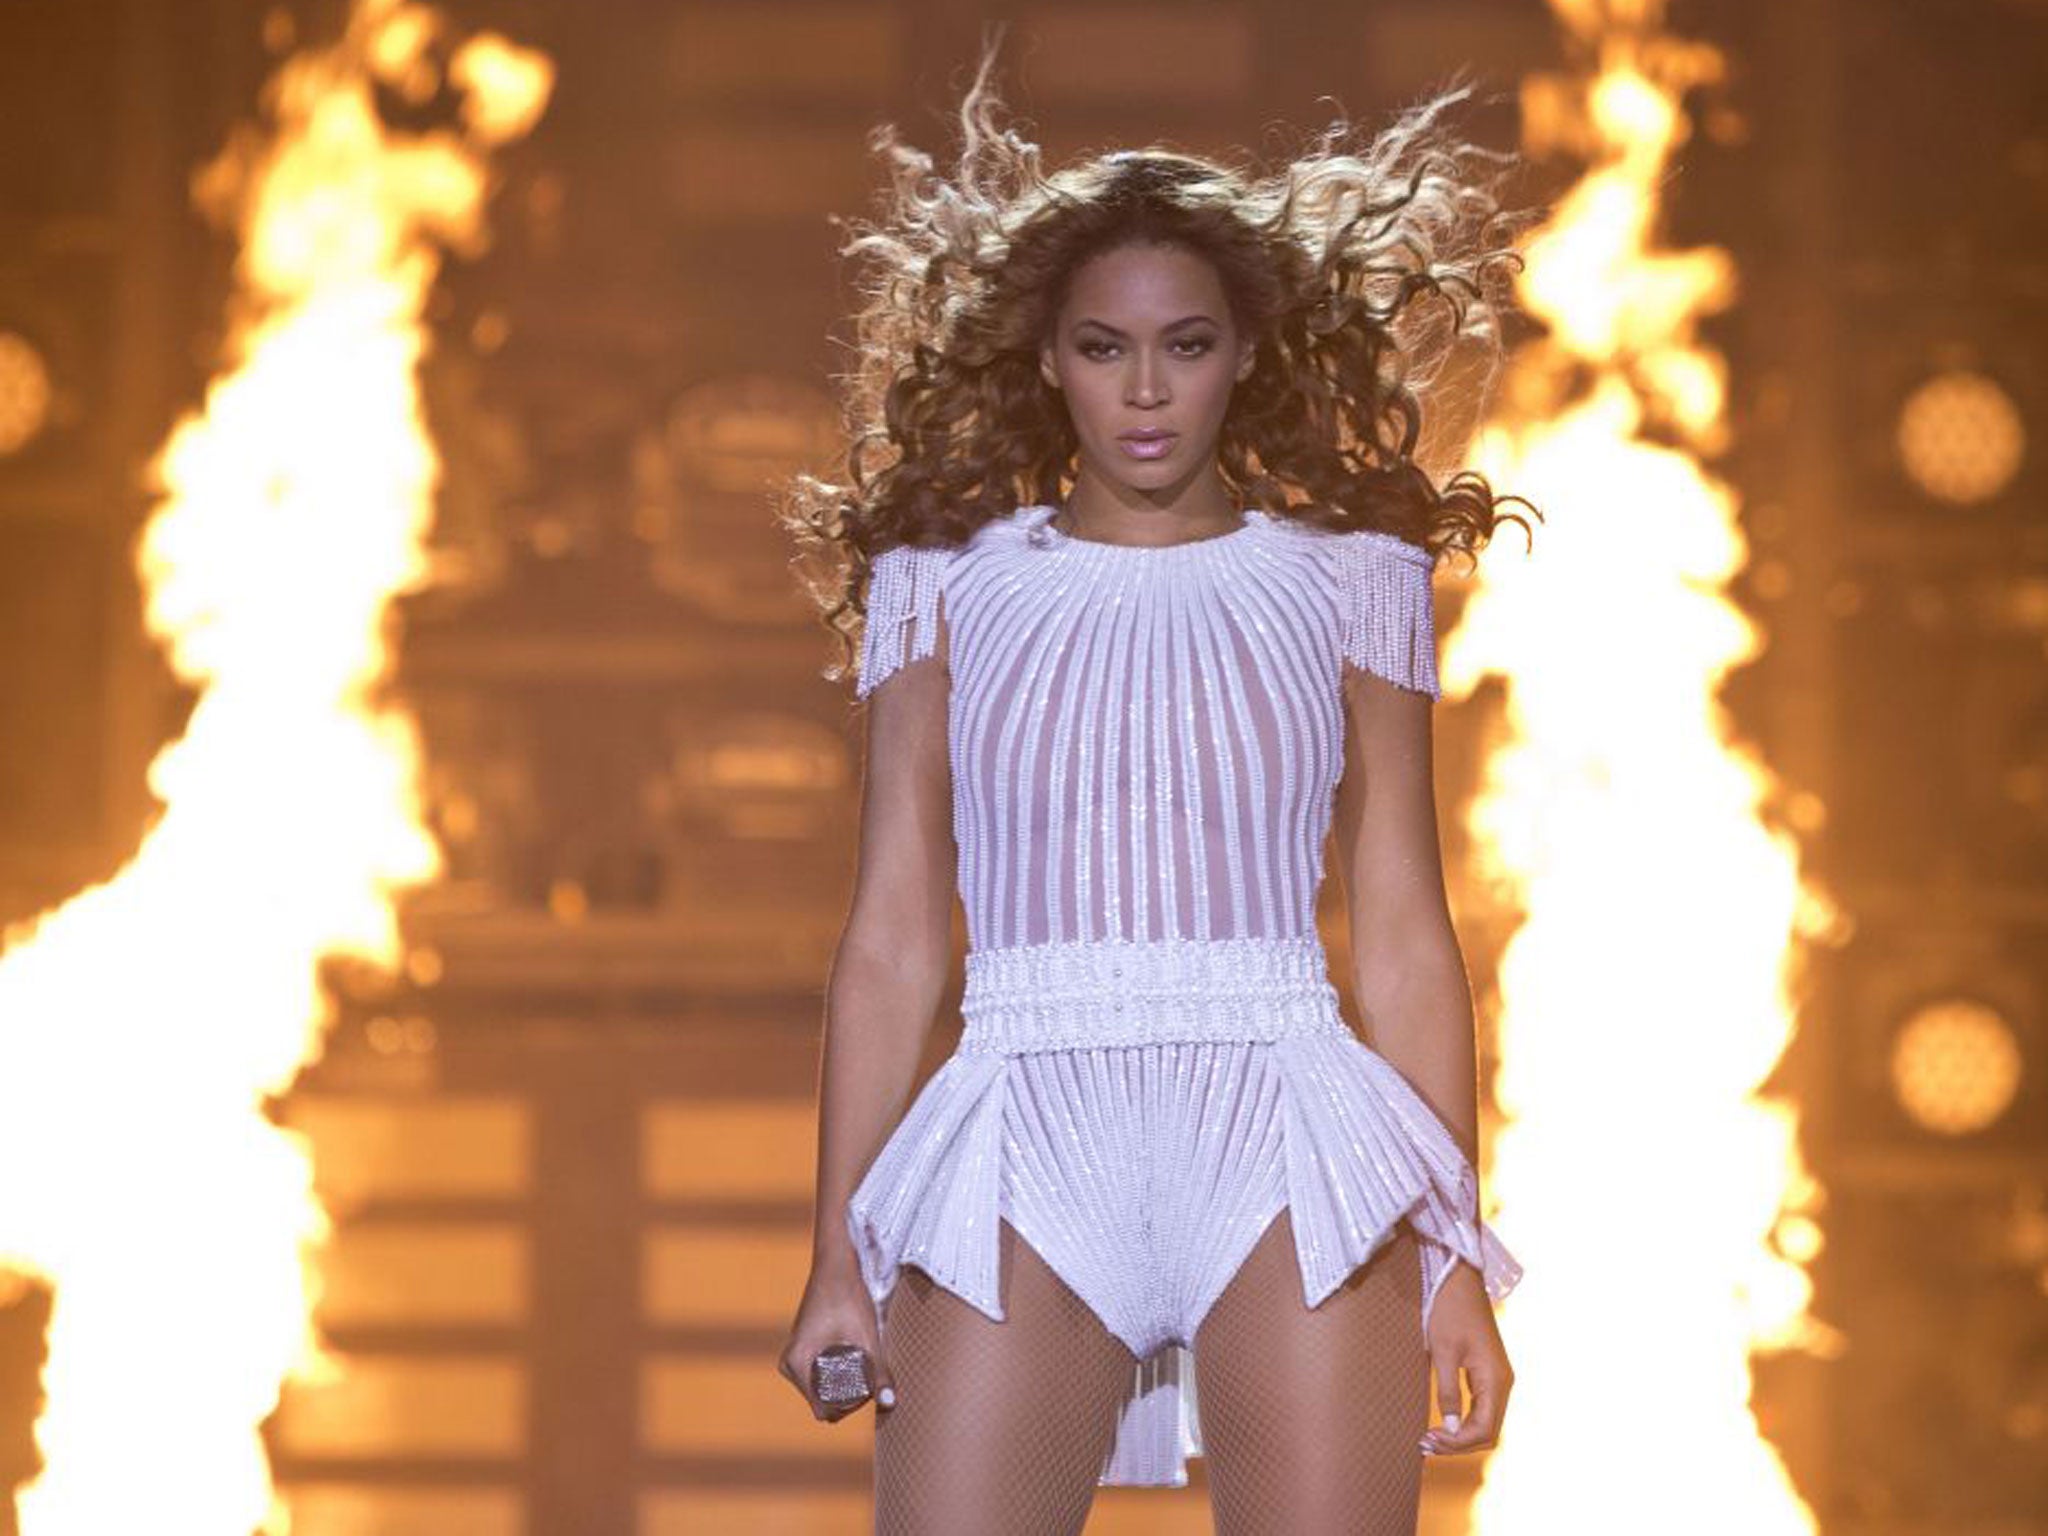 Beyonce has been called insensitive by NASA representatives for using a clip from the 1986 Challenger tragedy in which seven astronauts lost their lives